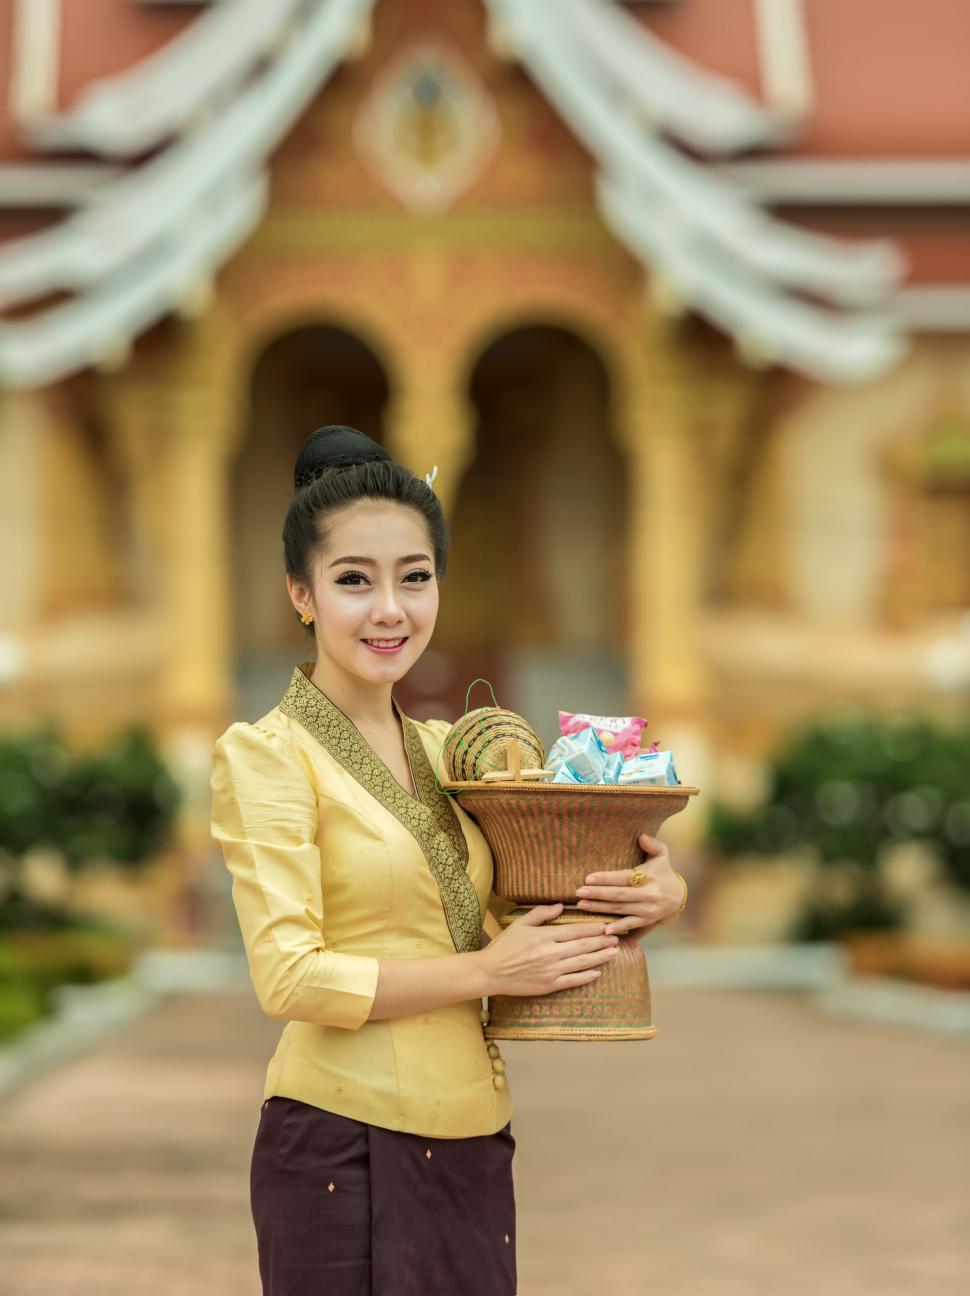 Free Image of Woman Holding a Basket of Presents in Front of a Building 